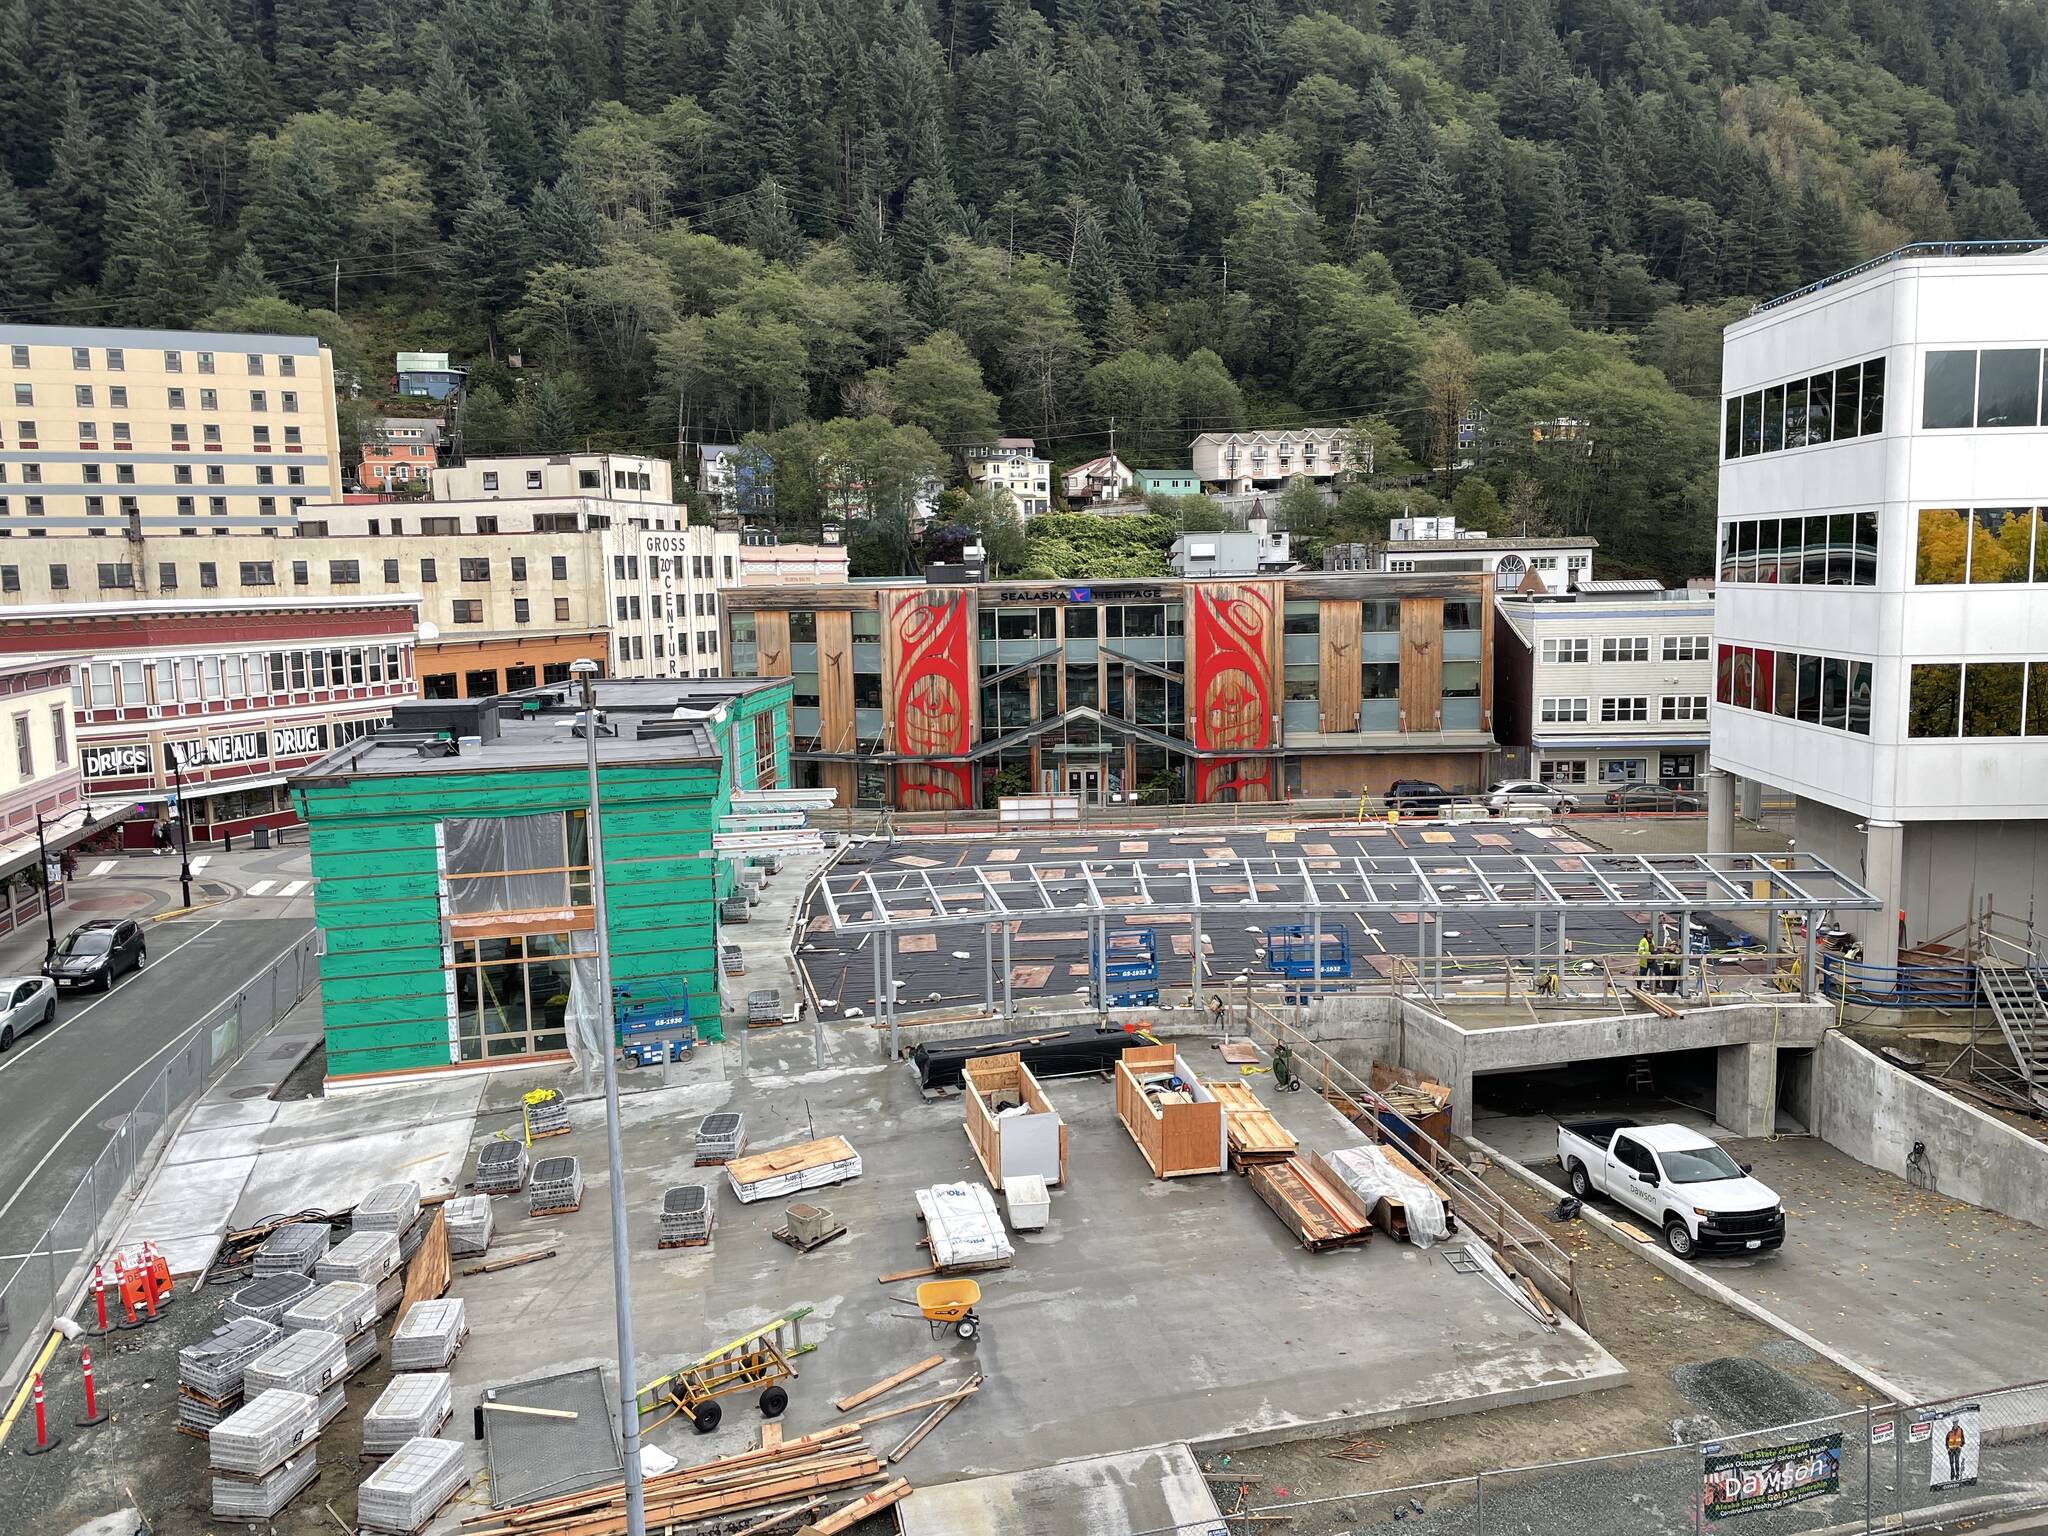 Construction continues at Sealaska Heritage Institute’s Northwest Coast arts campus on Sept. 24. Lee Kadinger, SHI COO said the project is “back on track and moving right along” after experiencing some delays. (Michael S. Lockett/Juneau Empire)